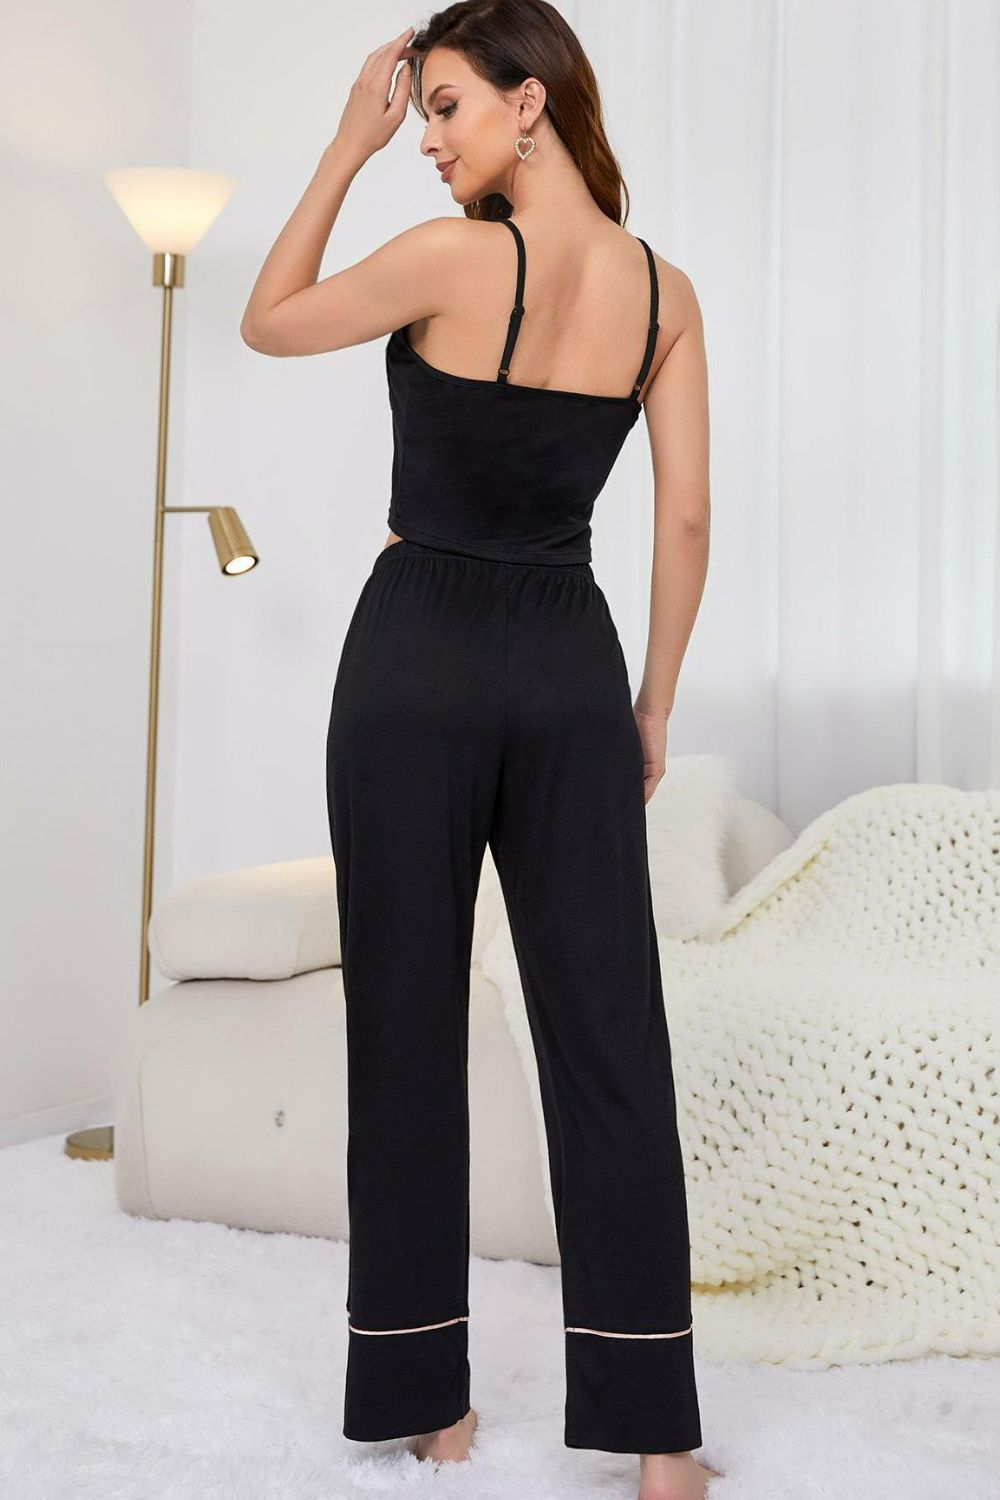 Women’s  Contrast Trim Cropped Cami and Pants Loungewear Set